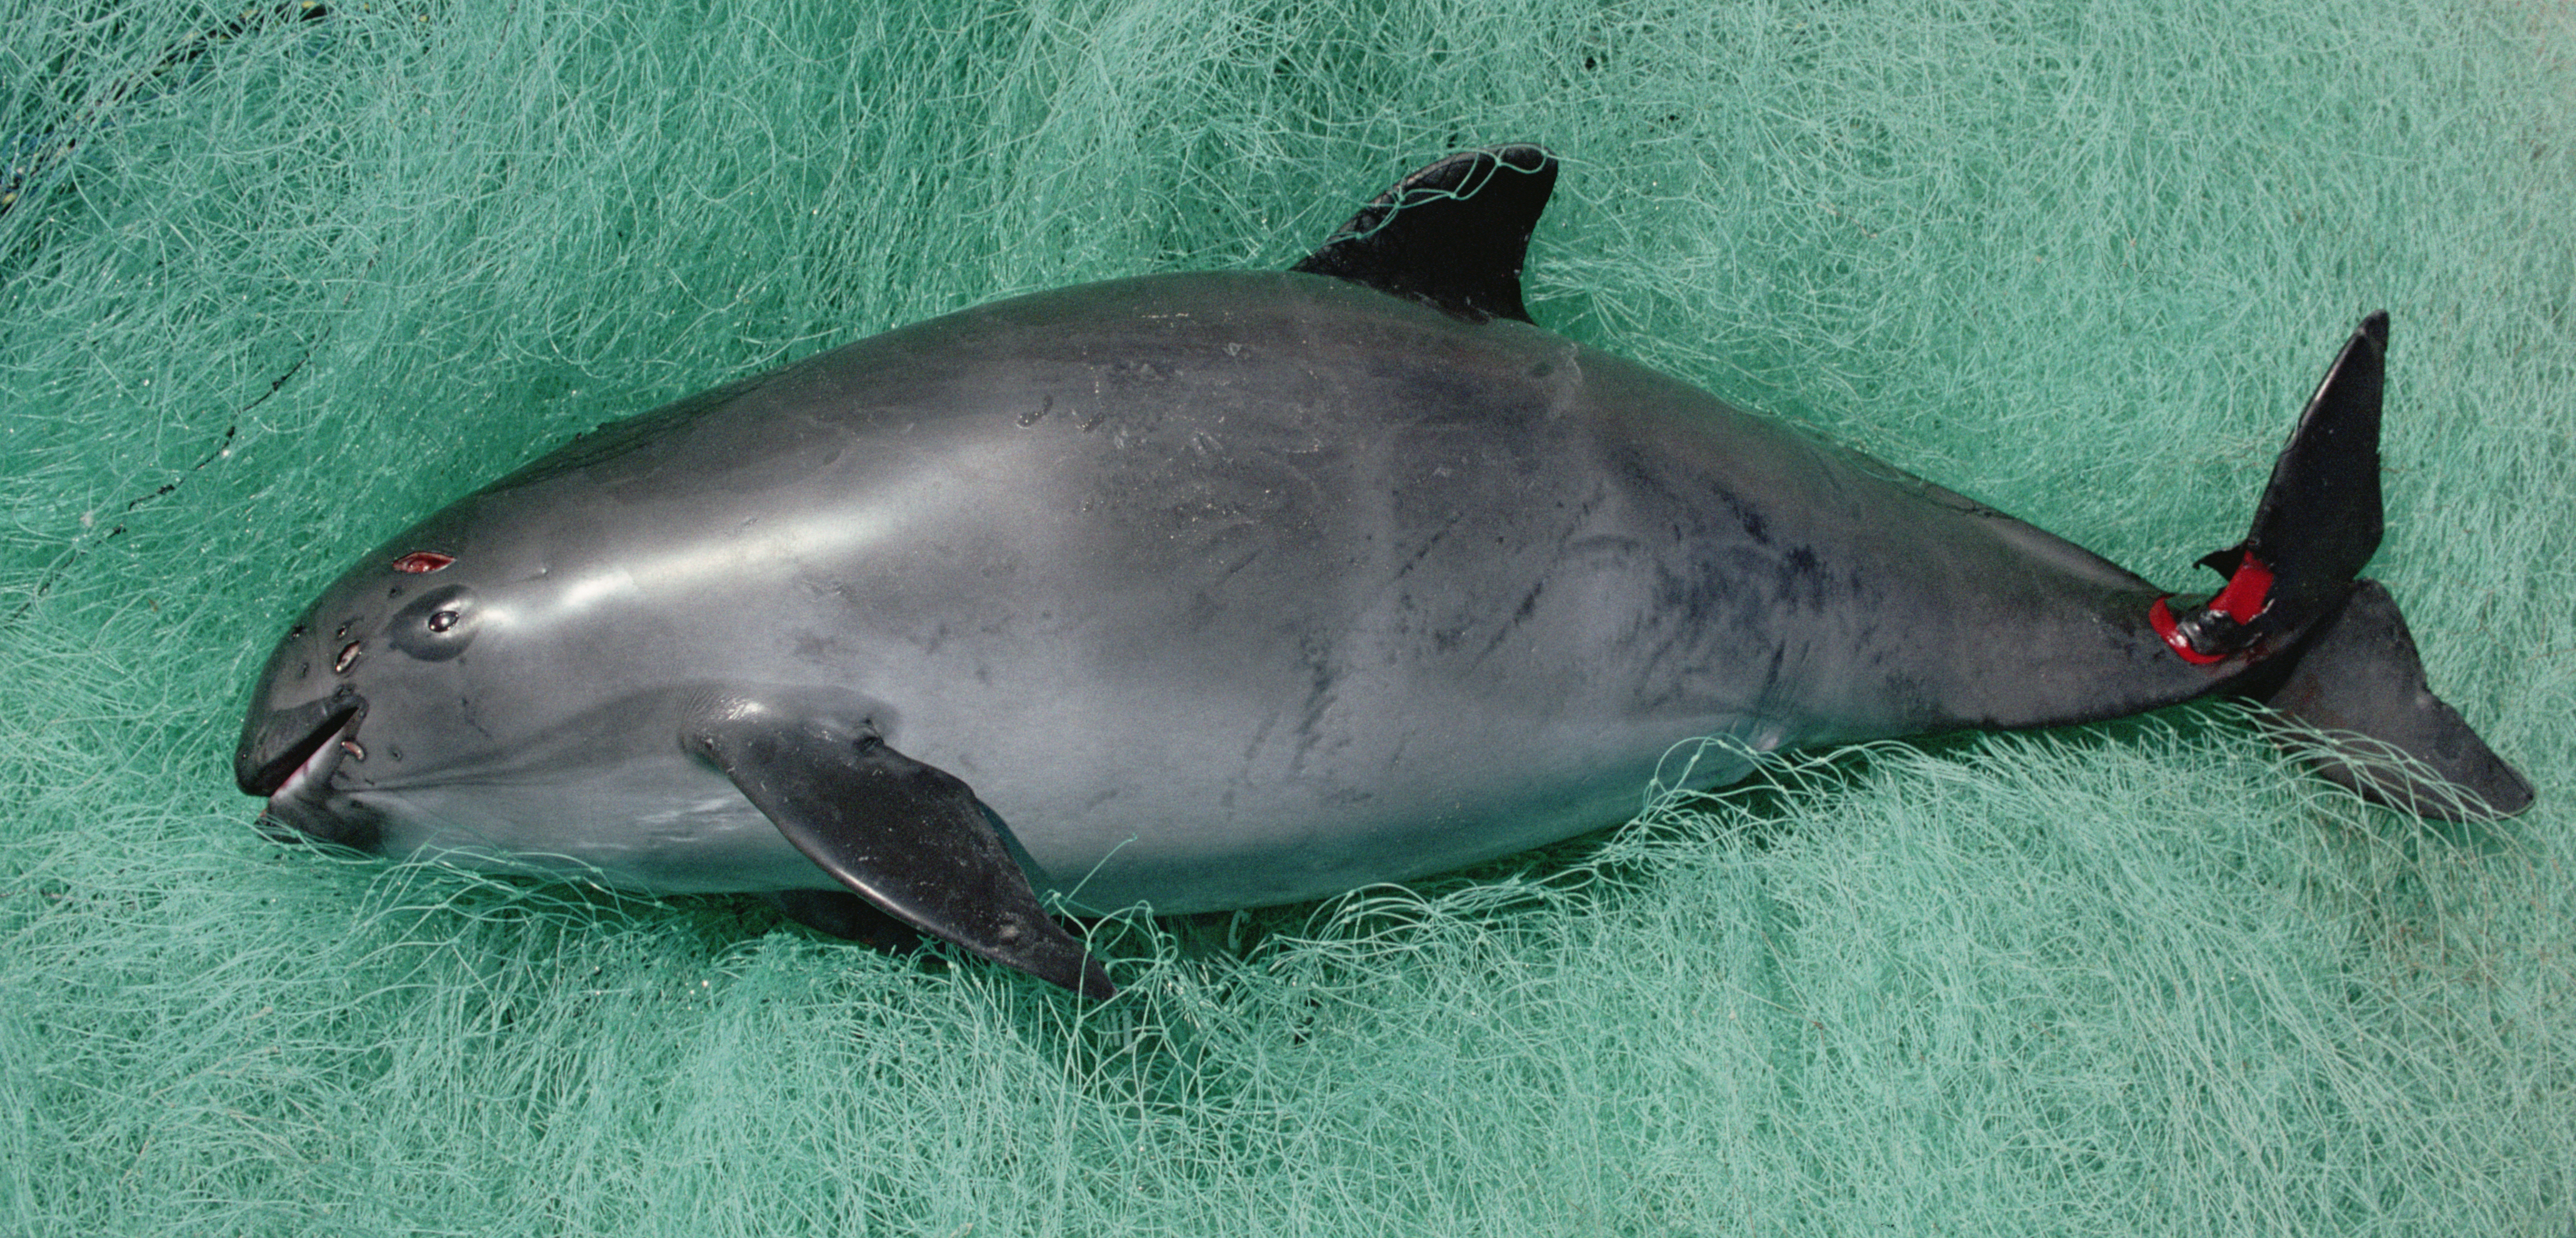 A dead vaquita, killed by a gill net in the Gulf of California. Photo by Flip Nicklin/Minden Pictures/Corbis